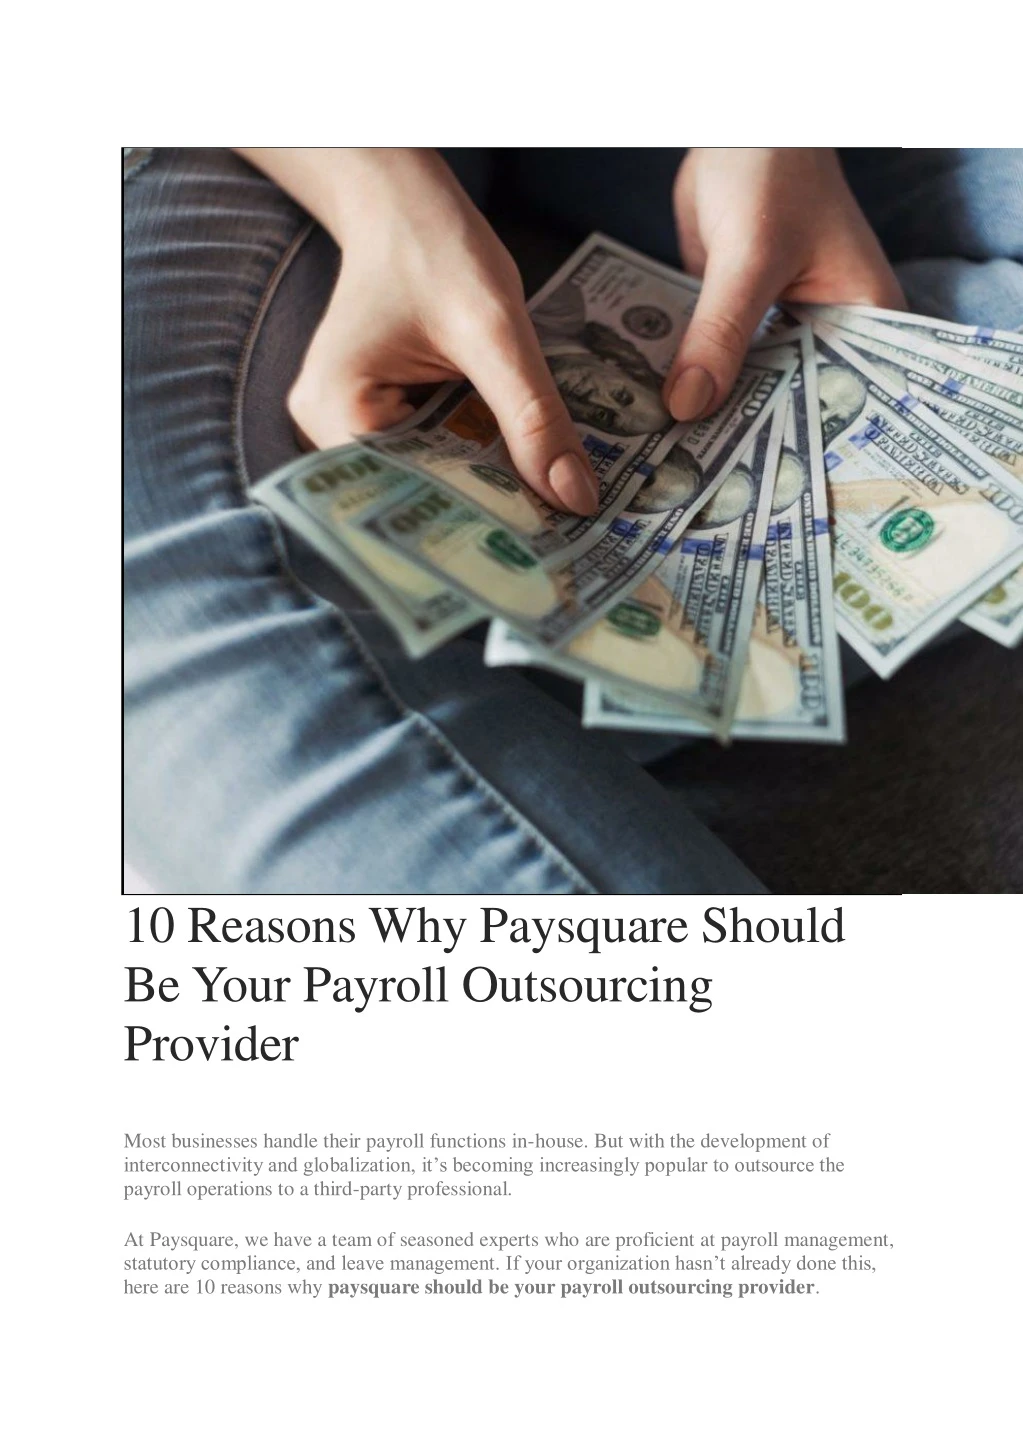 10 reasons why paysquare should be your payroll